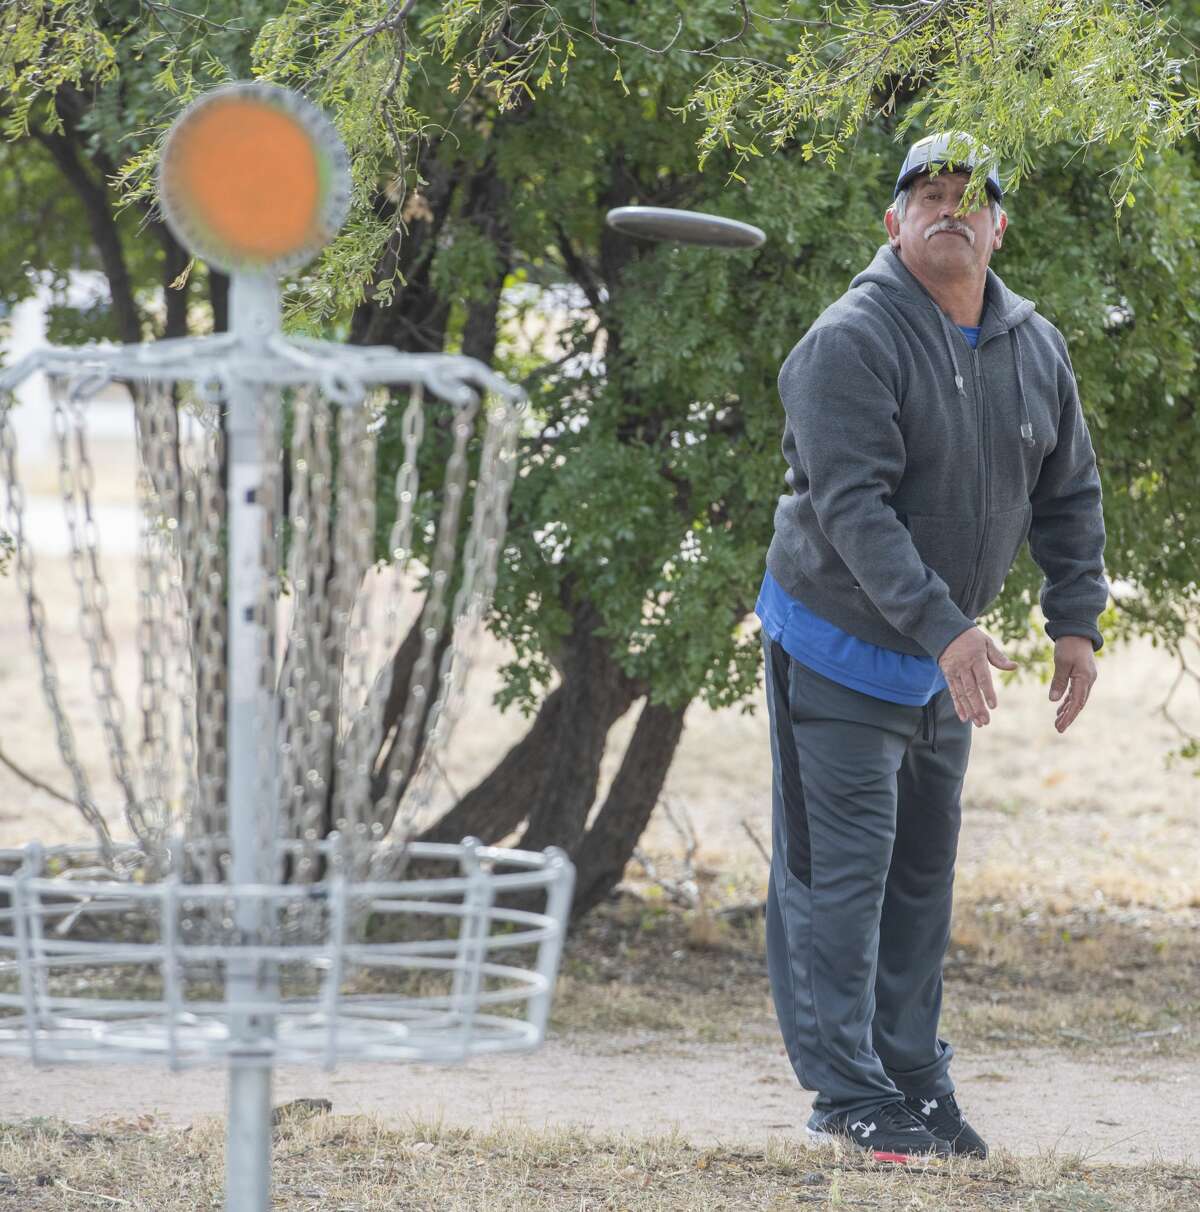 Disc golf will be part of the Walk in the Park Day activities Wednesday at Windlands Parks